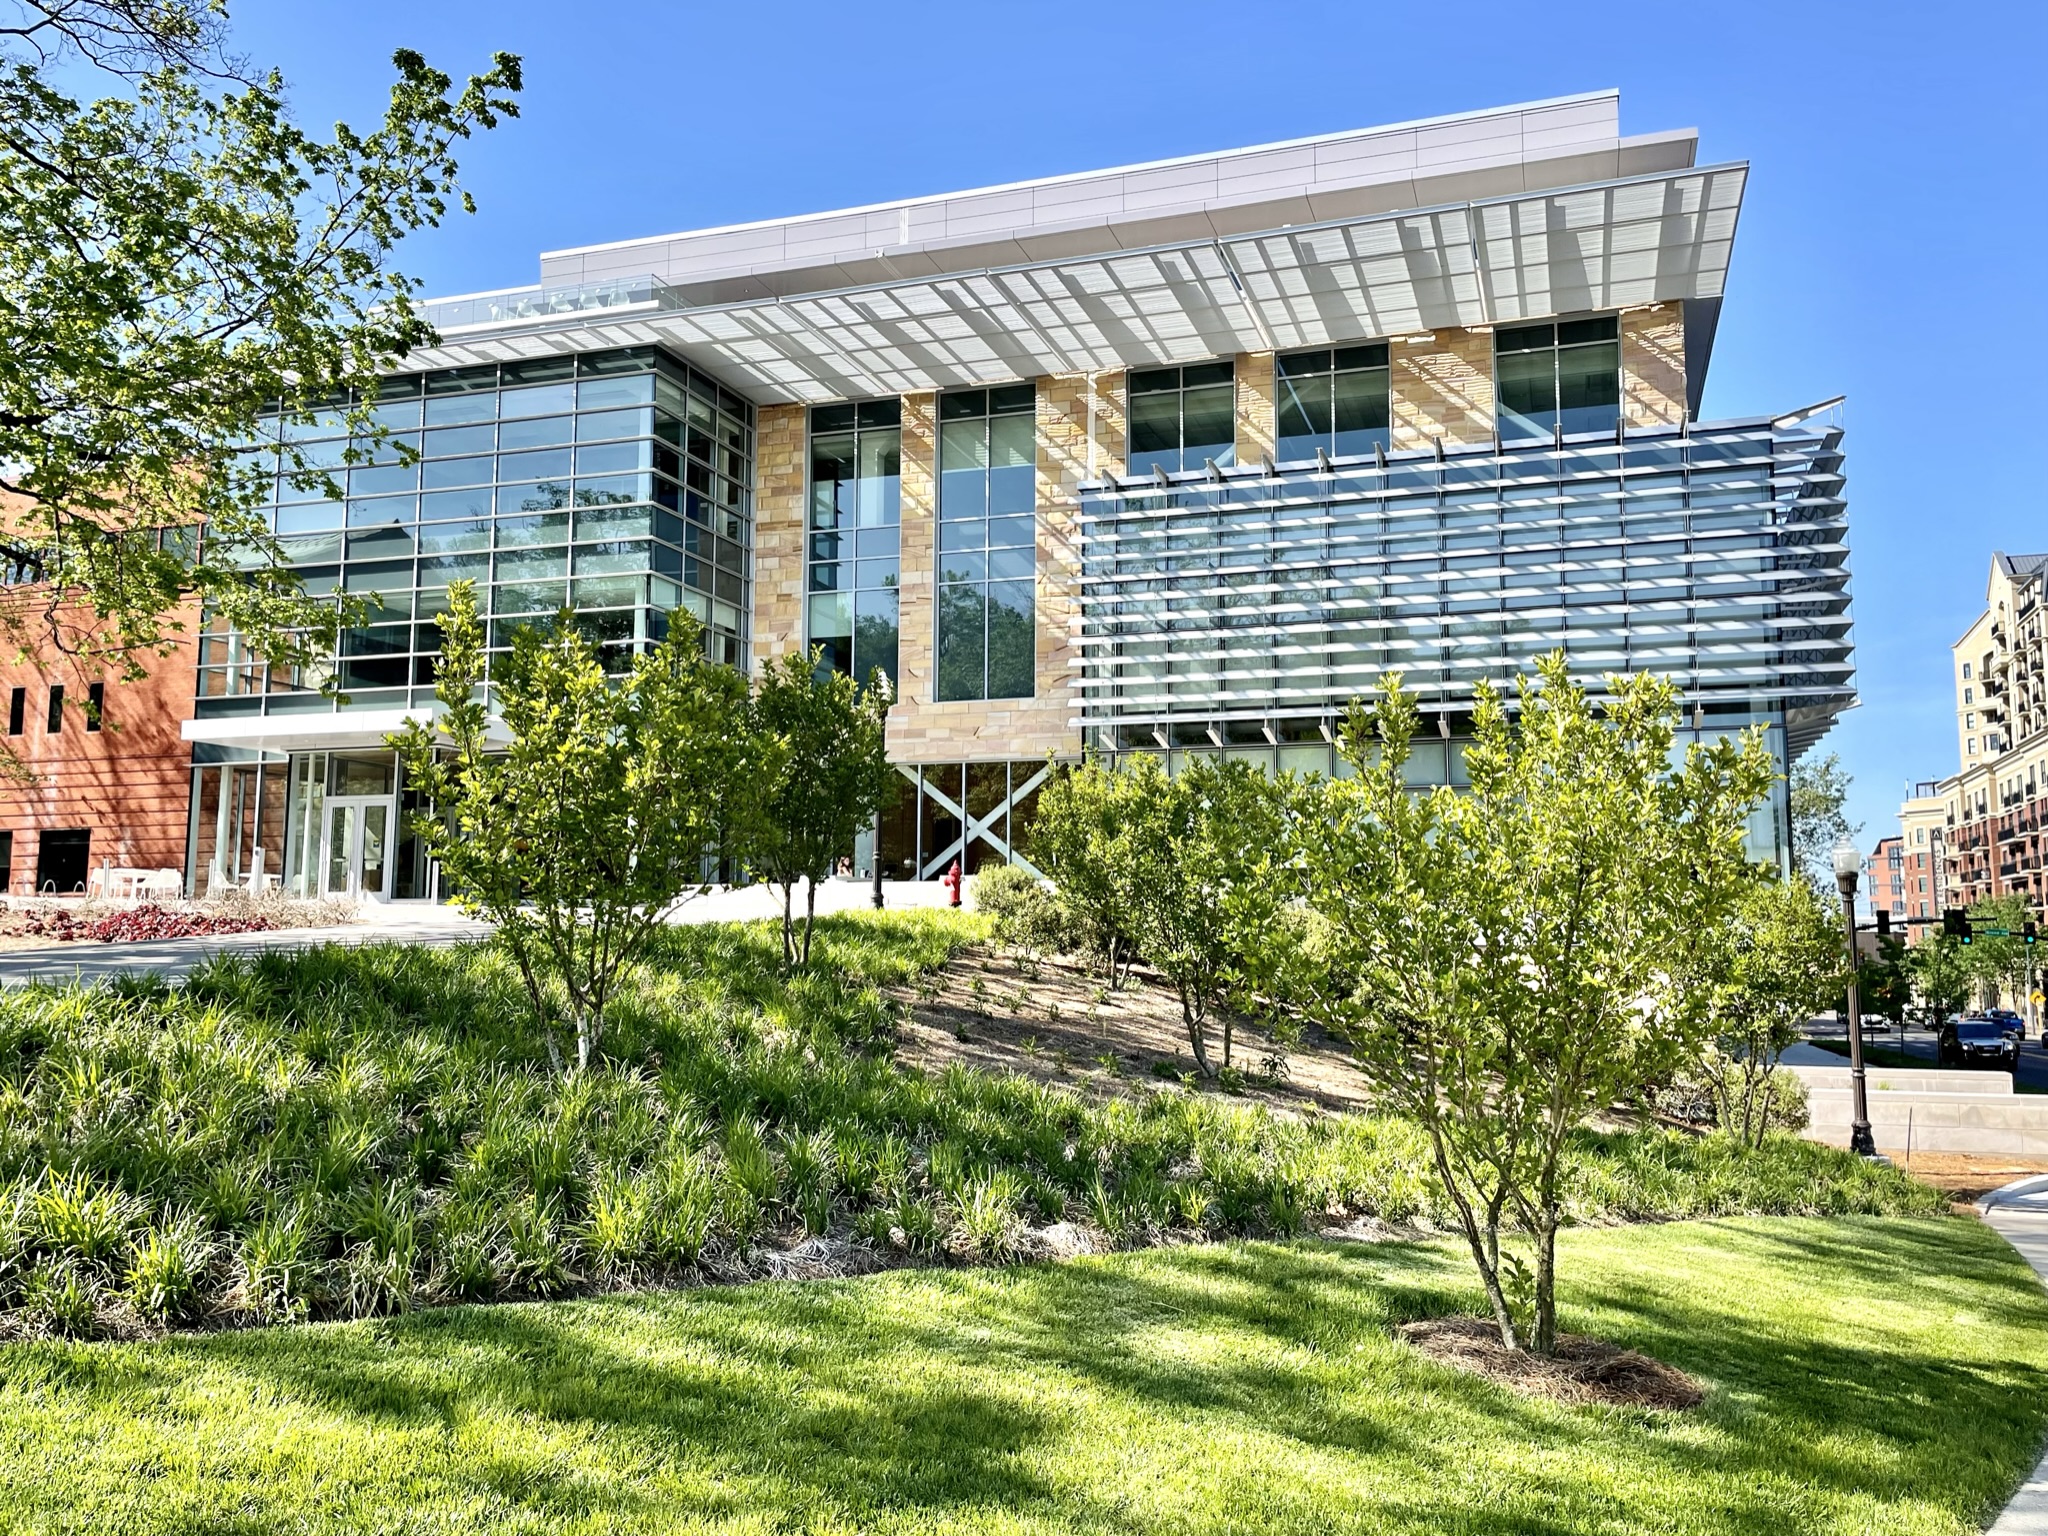 Exterior view of the expansion wing of Vanderbilt University's Owen School of Management's new Management Hall